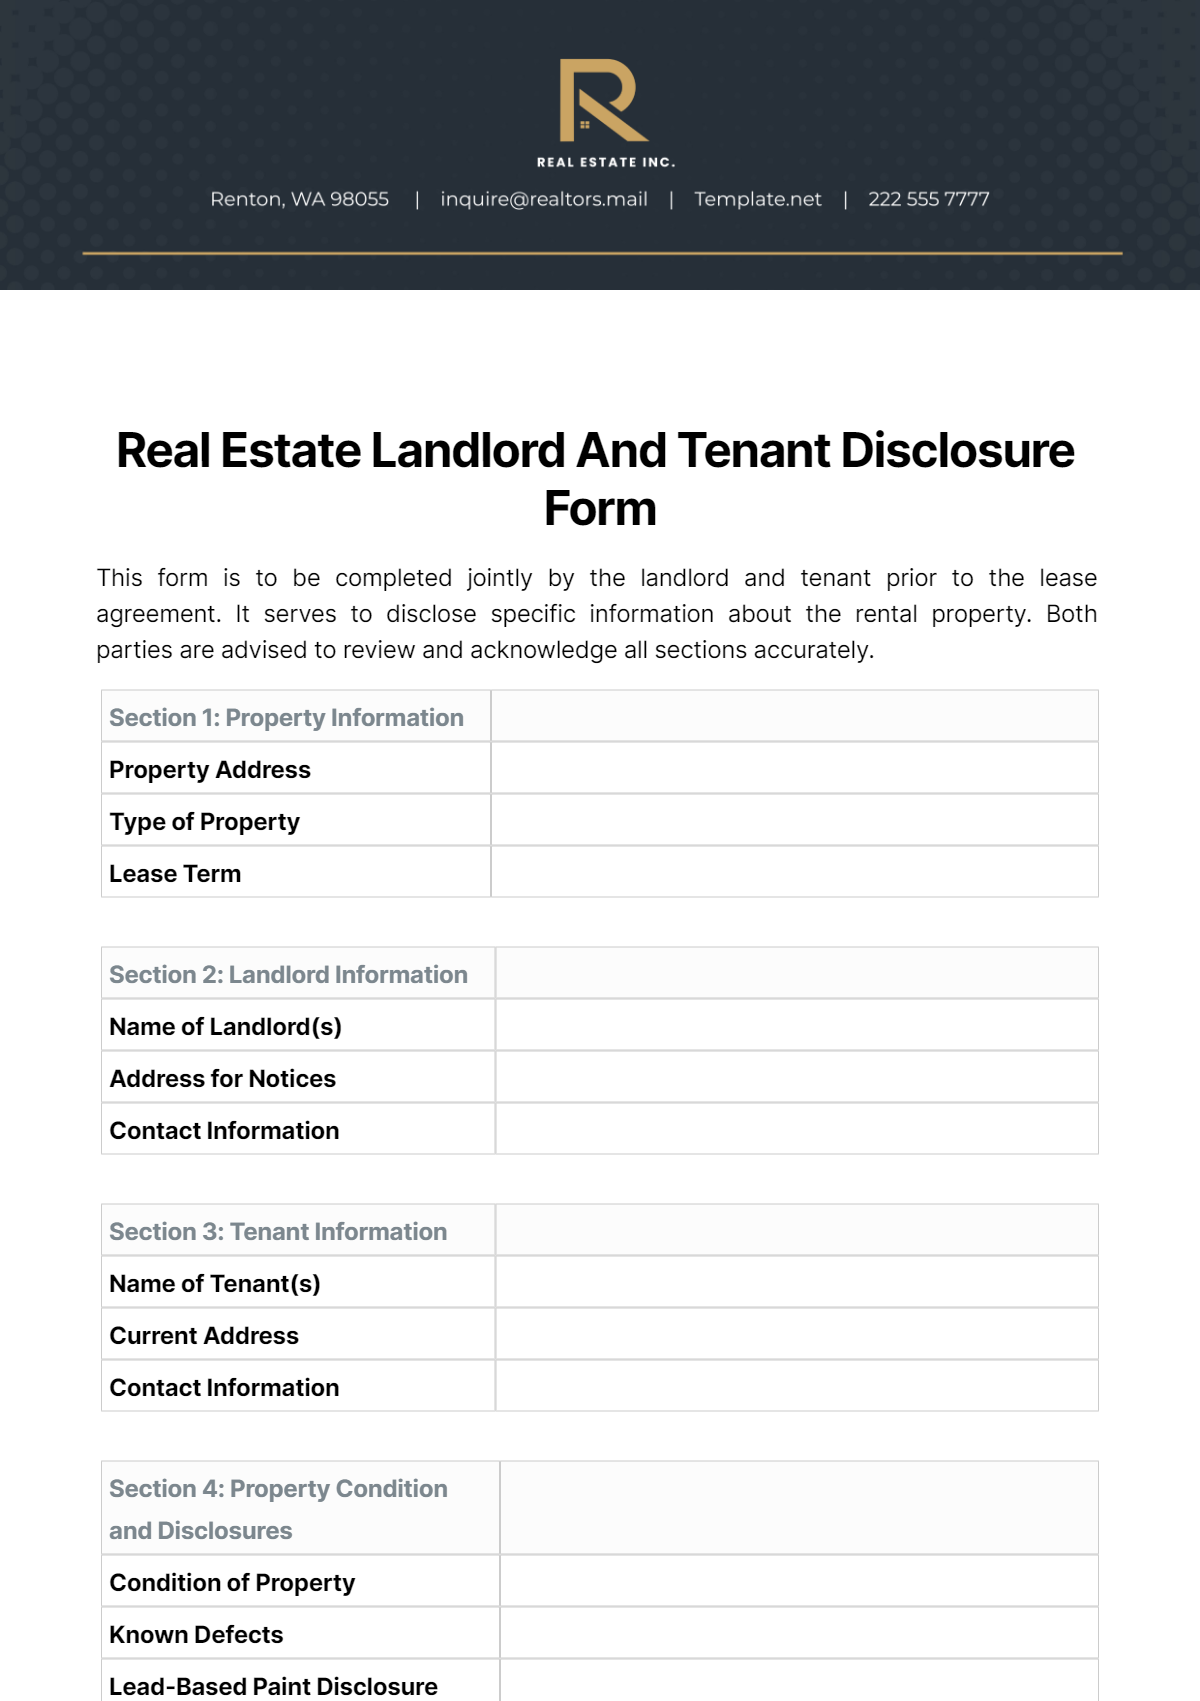 Real Estate Landlord And Tenant Disclosure Form Template